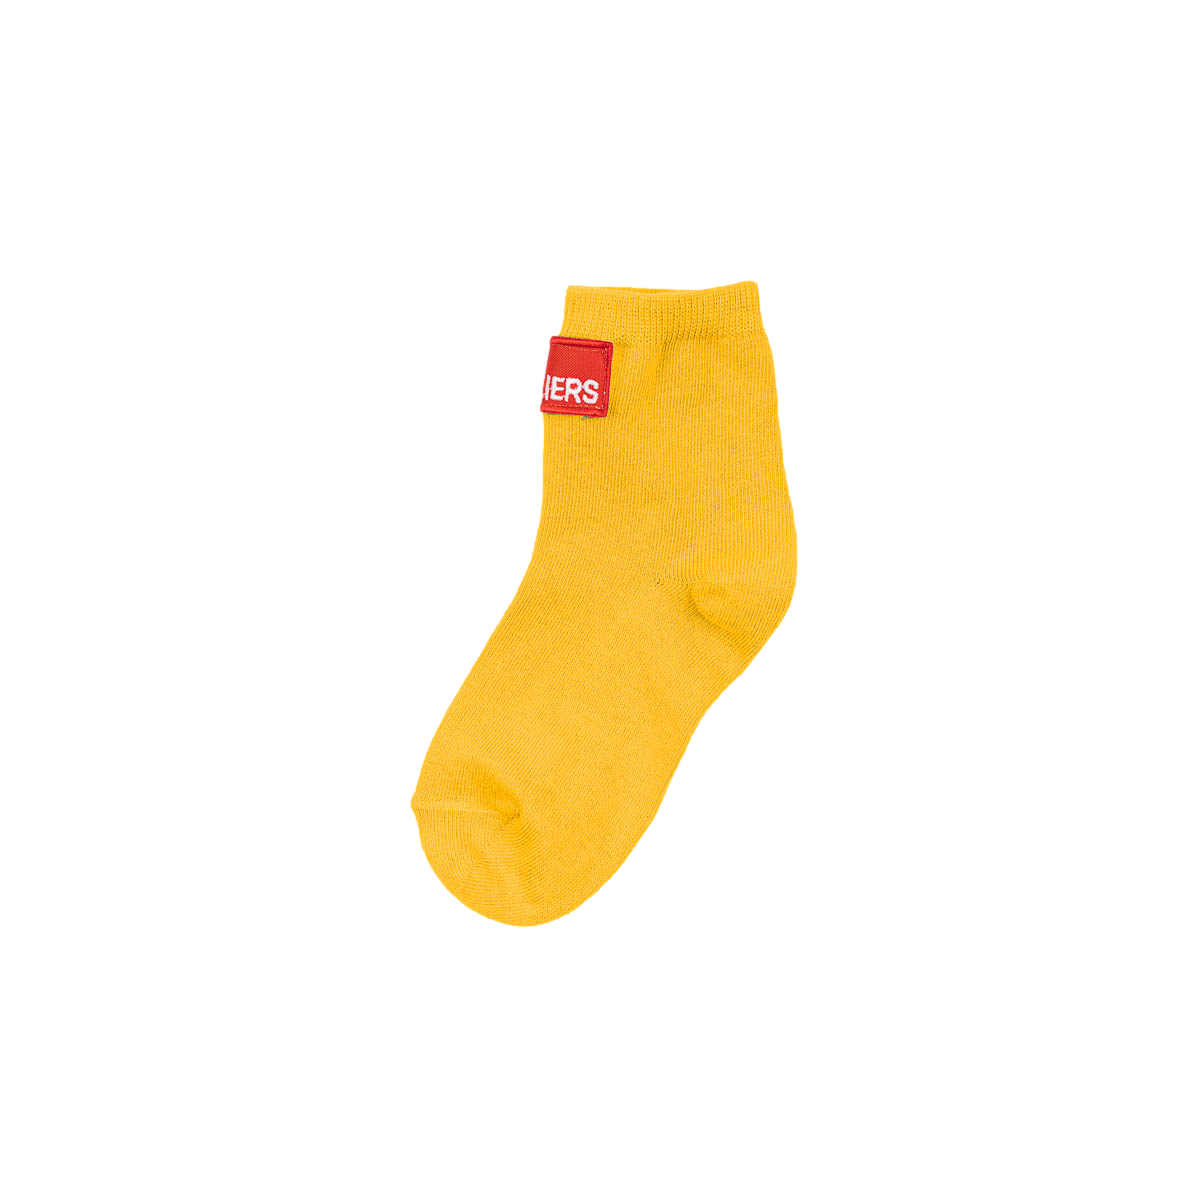 Les Écoliers Socks Yellow